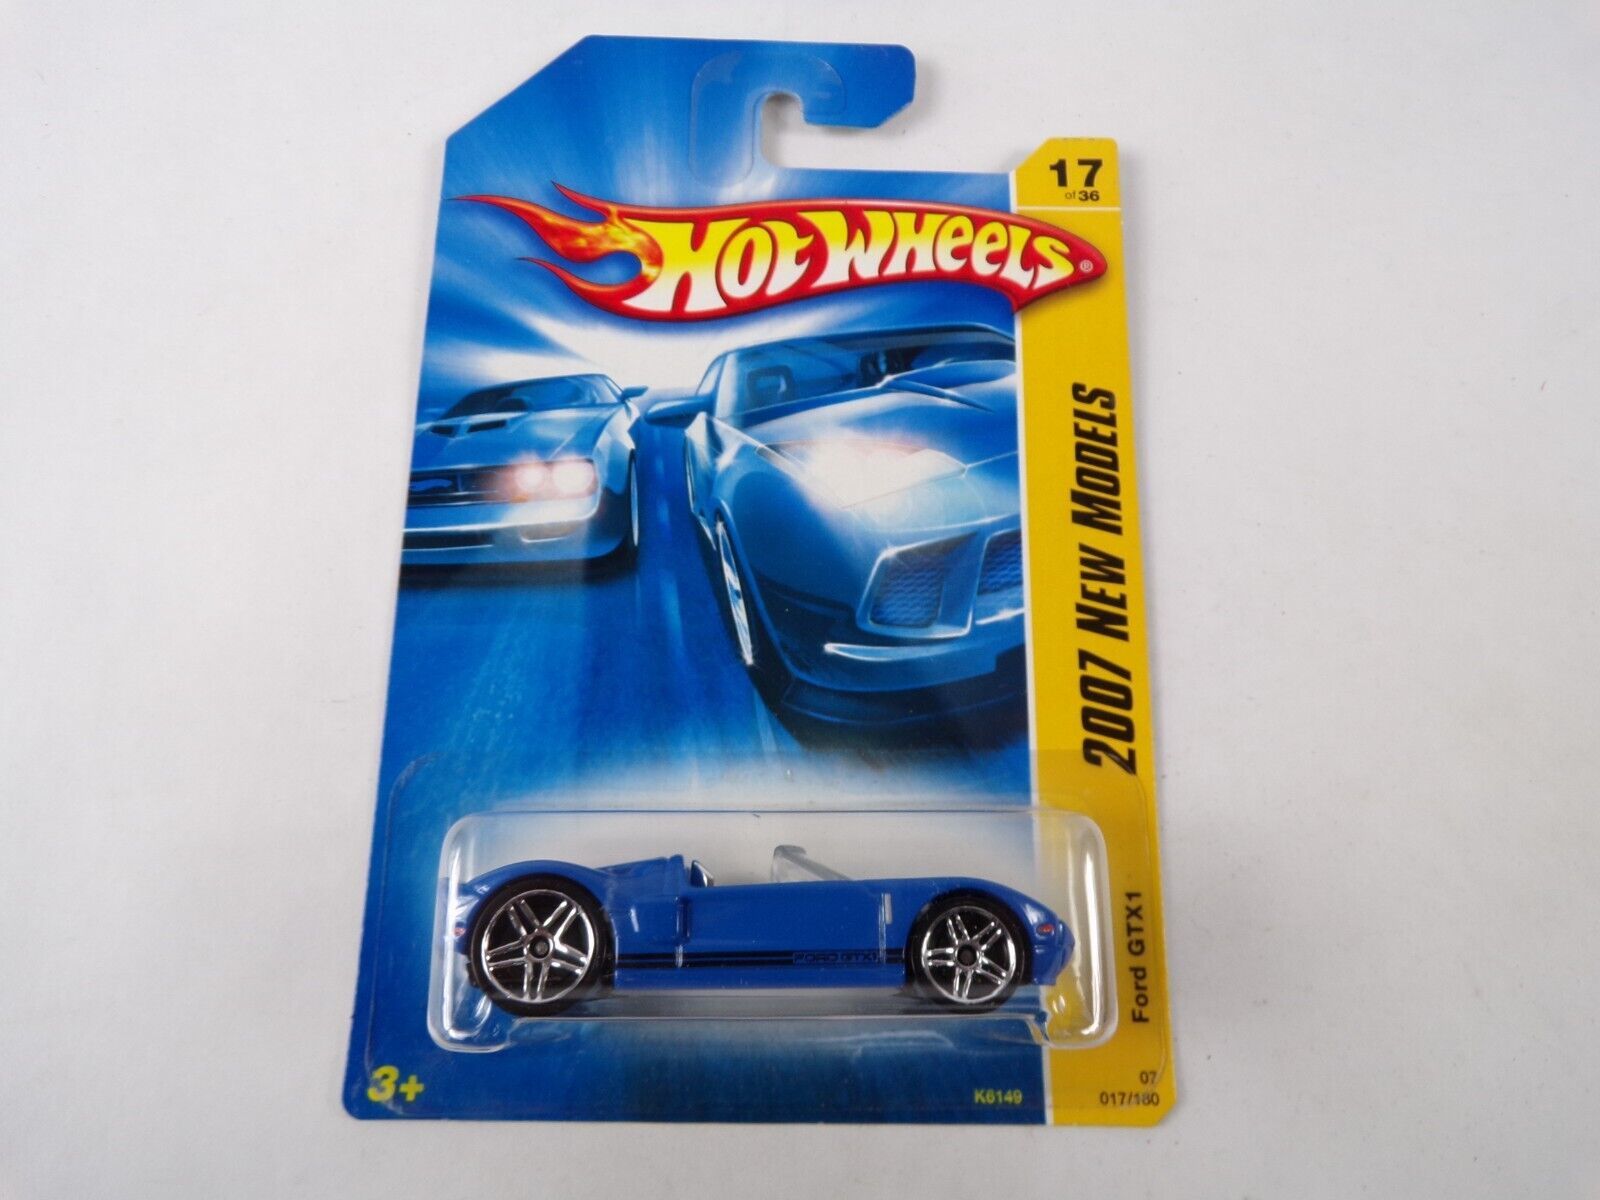 Primary image for Van / Sports Car / Hot Wheels 2007 New Models Ford Gt X1 K6149 #H10